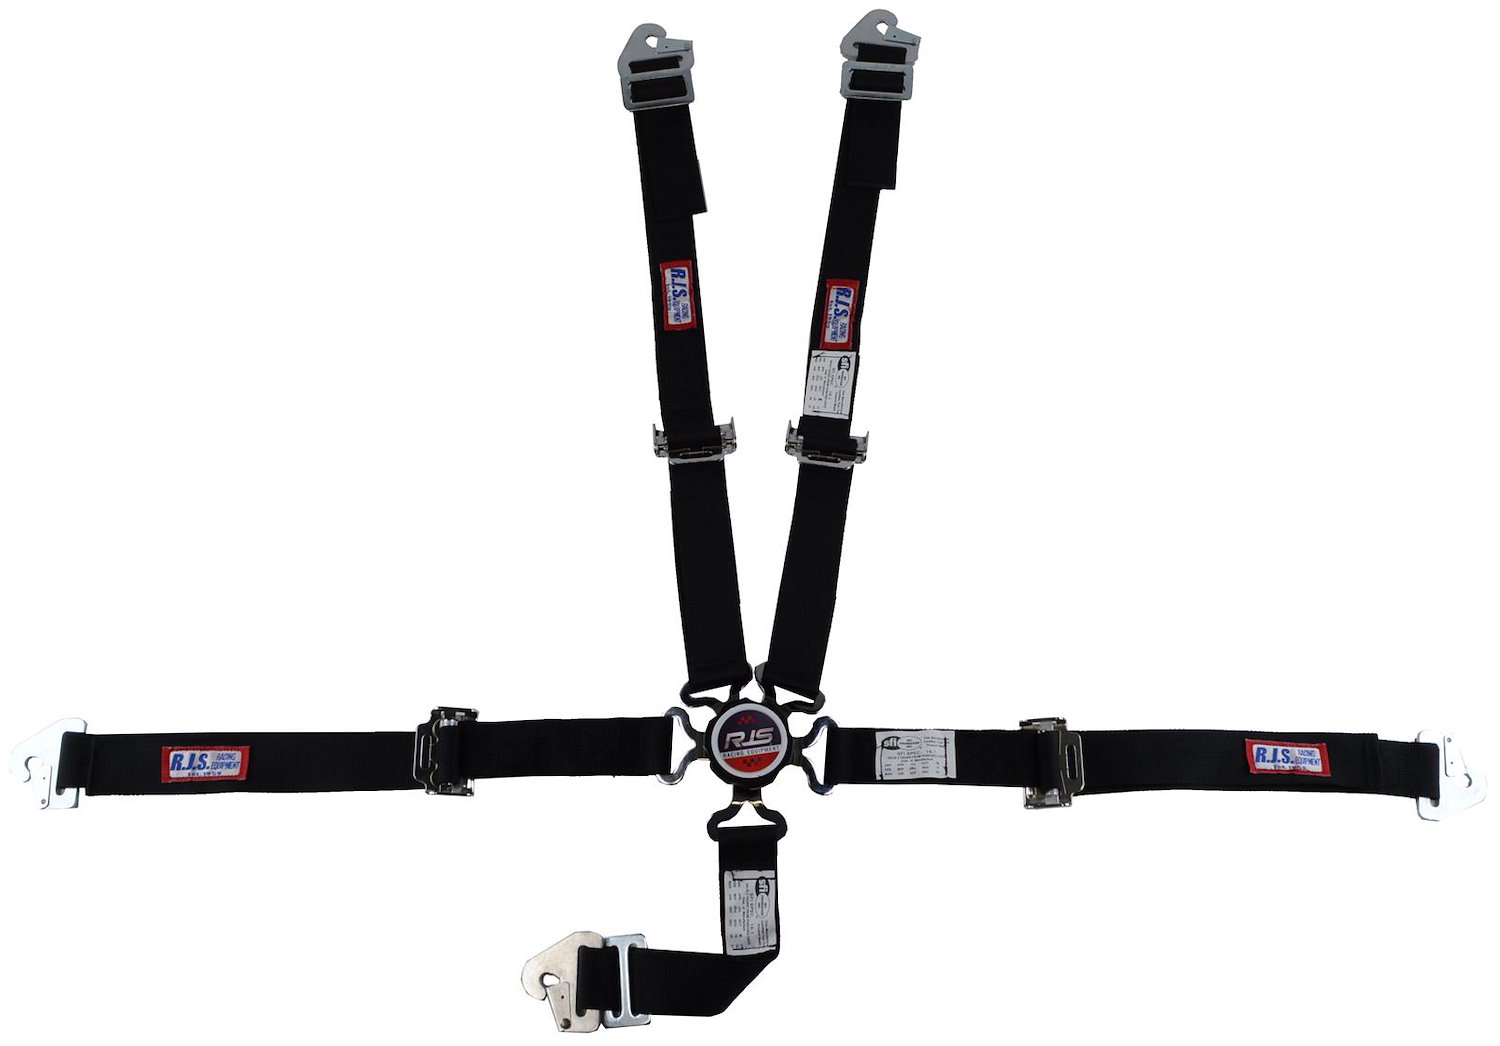 SFI 16.1 CAM-LOCK HARNESS 2 PULL UP Lap Belt 2 Shoulder Harness Individual FLOOR Mount 2 SINGLE Sub ALL WRAP ENDS BLUE